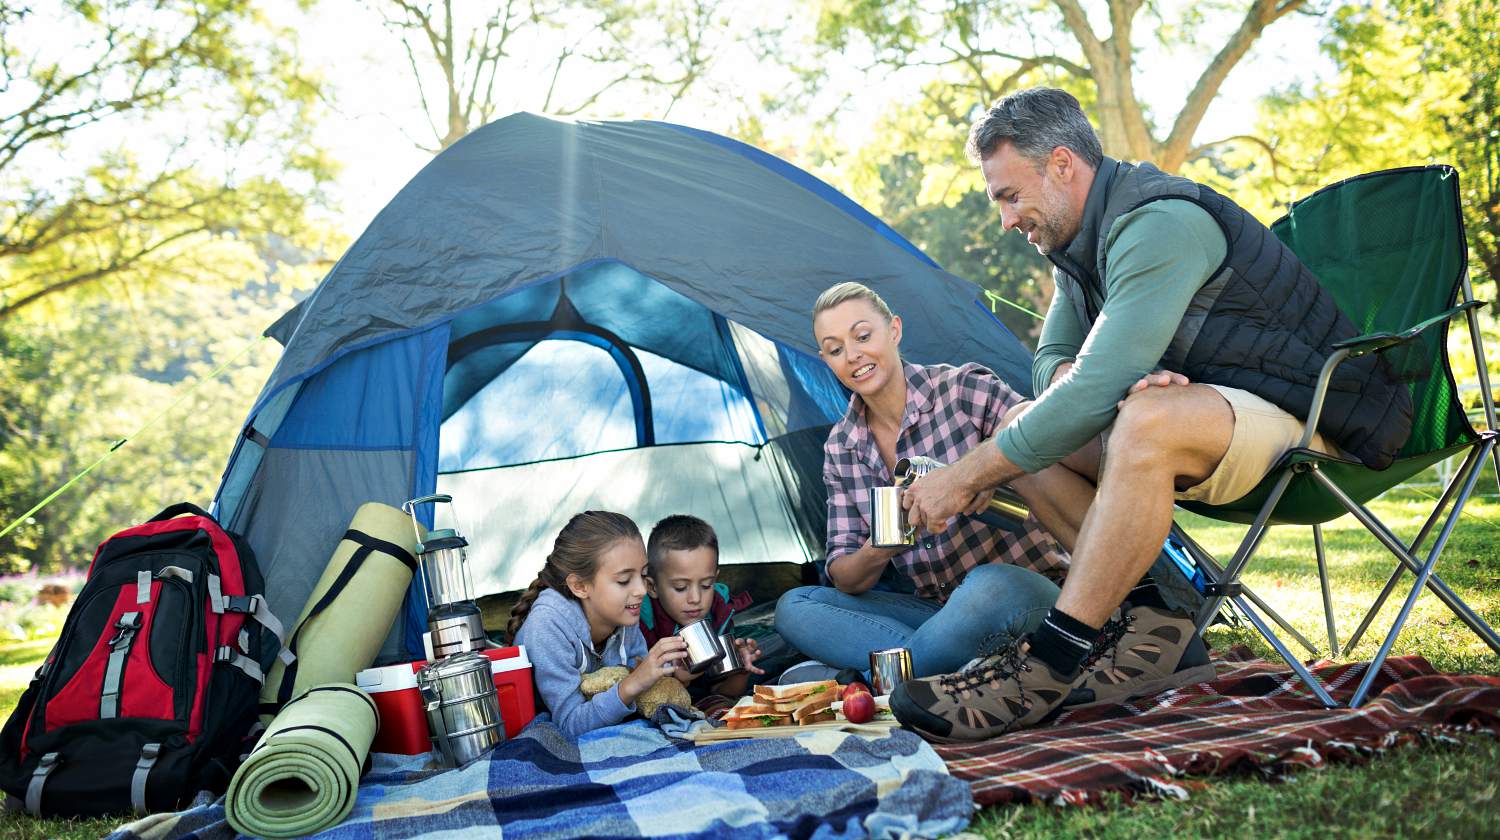 Feature | Family having snacks and coffee outside the tent at campsite | Camping Snacks | Appetizing Recipes Perfect Outdoors